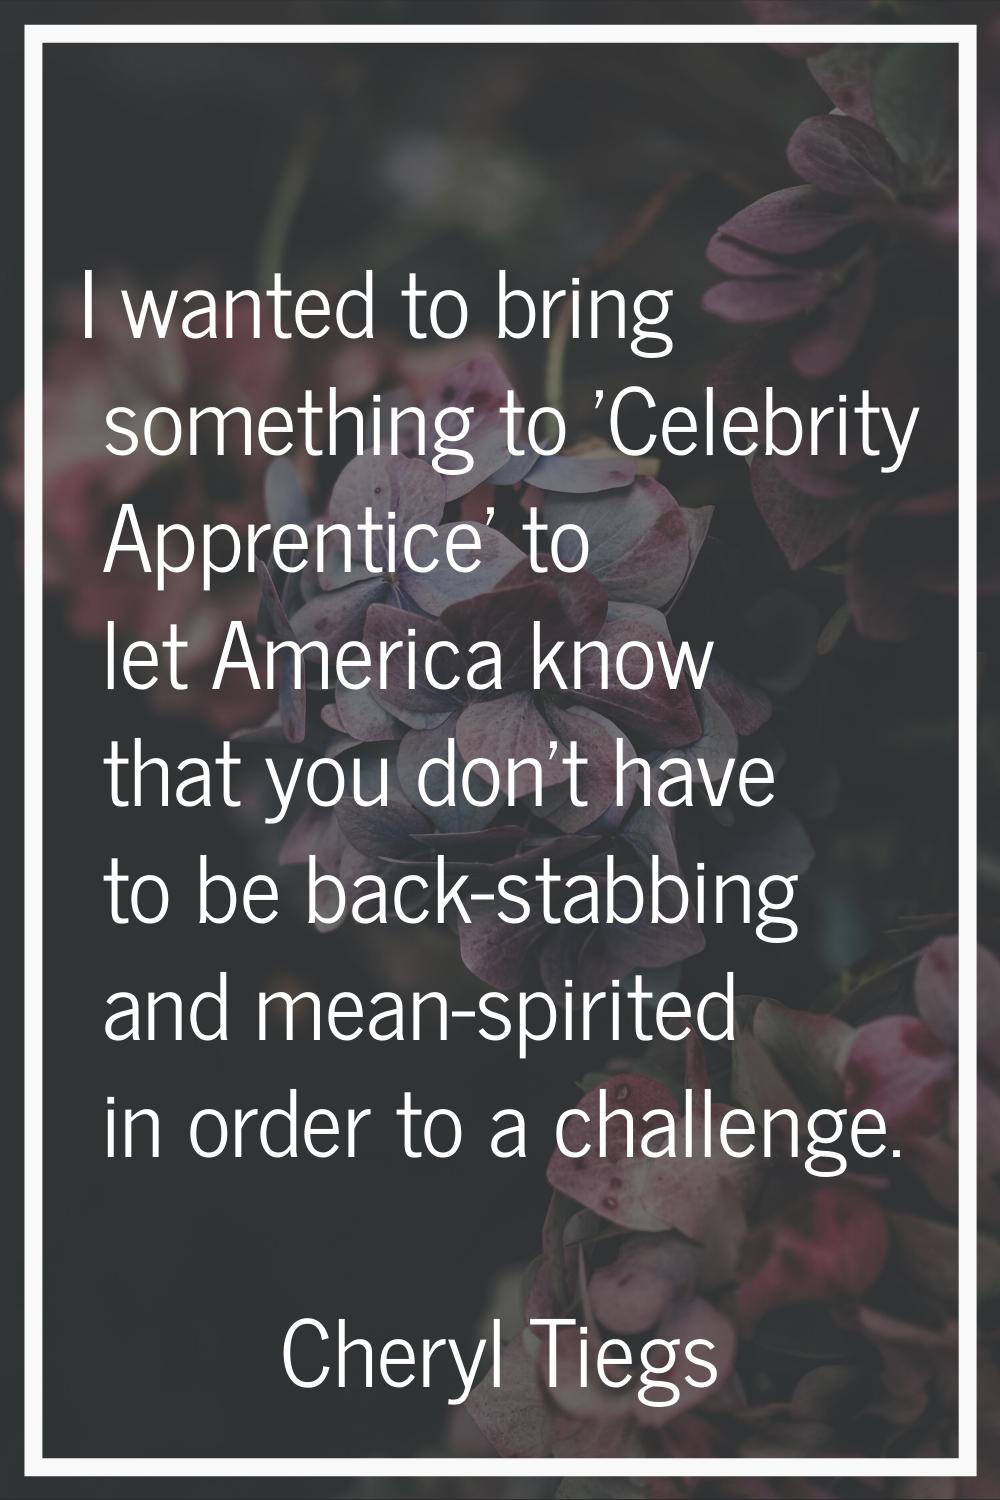 I wanted to bring something to 'Celebrity Apprentice' to let America know that you don't have to be